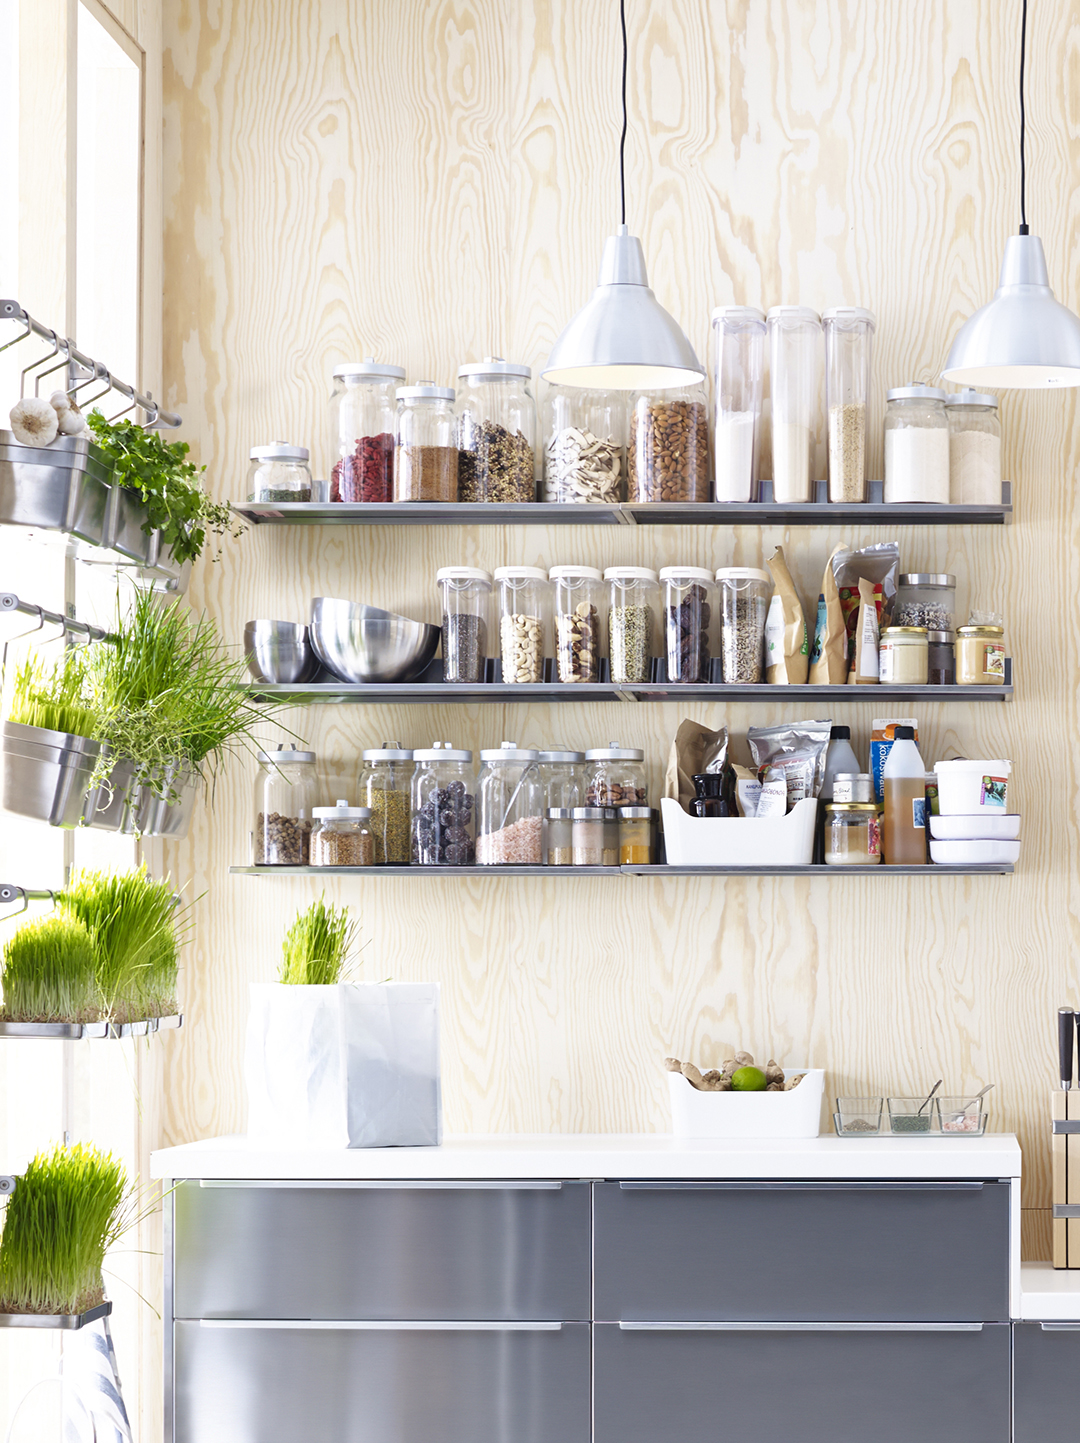 How to make the most of limited space in a small kitchen - We Are Scout